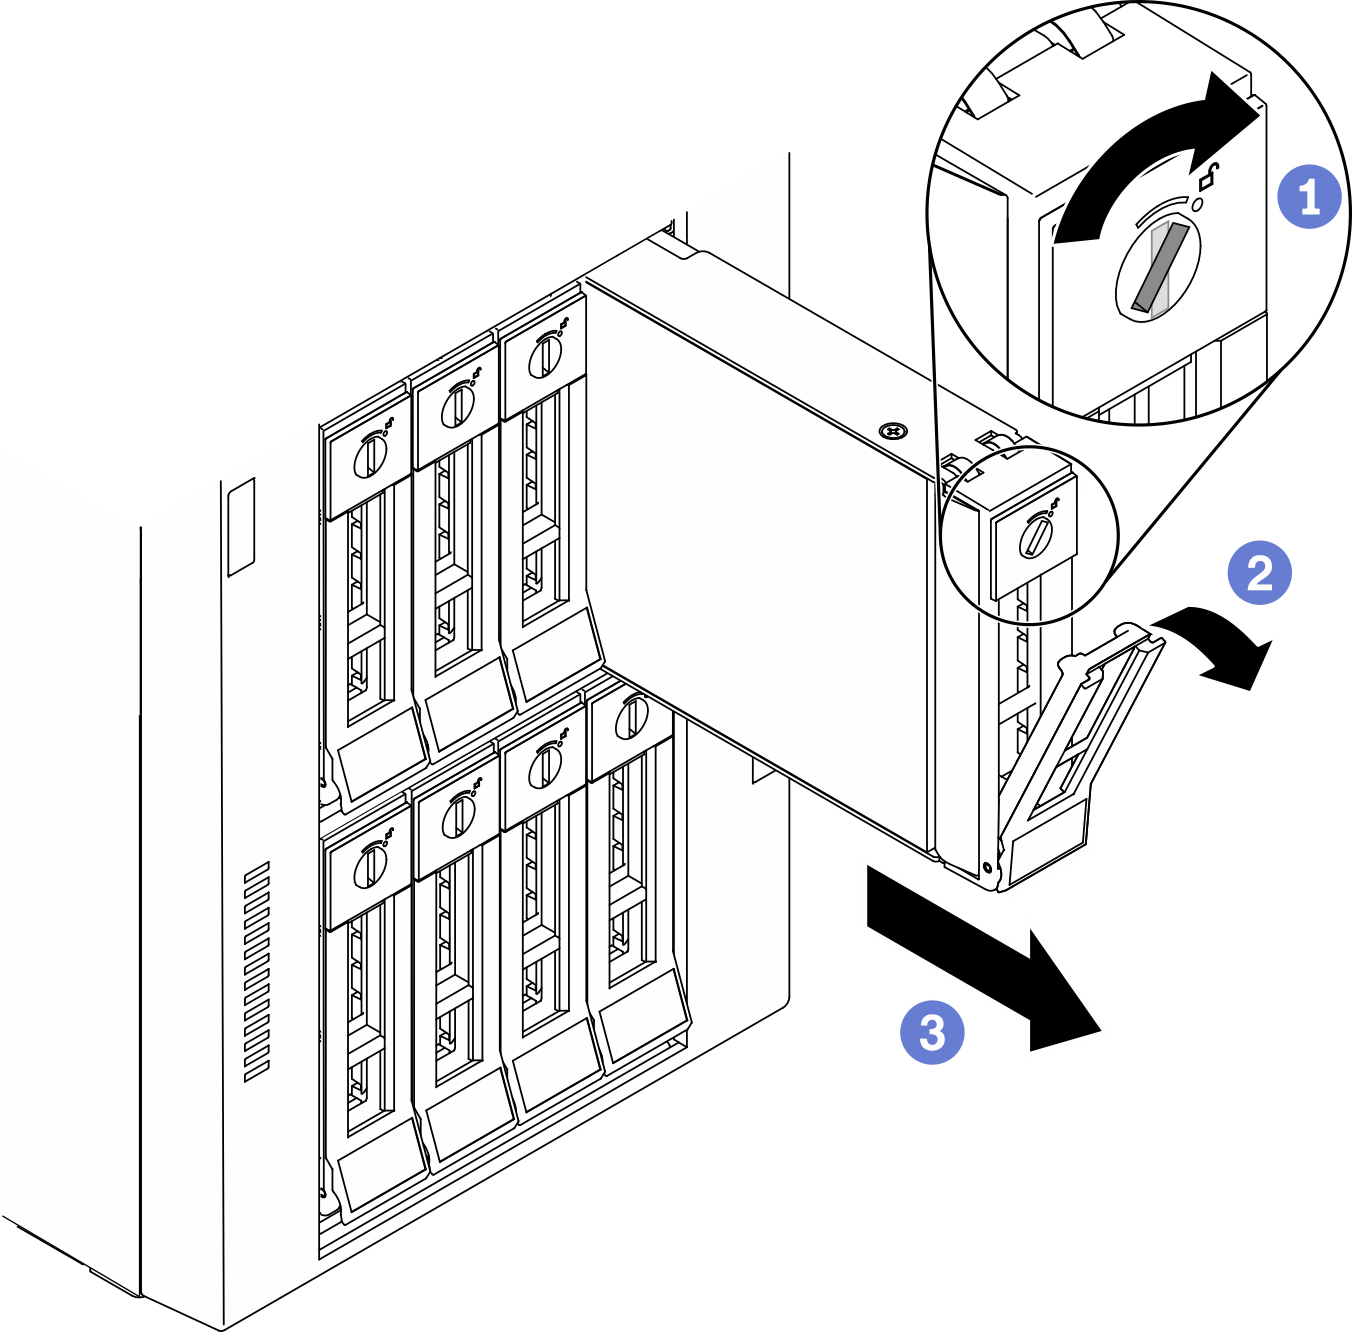 Opening the tray handle of a 3.5-inch simple-swap drive